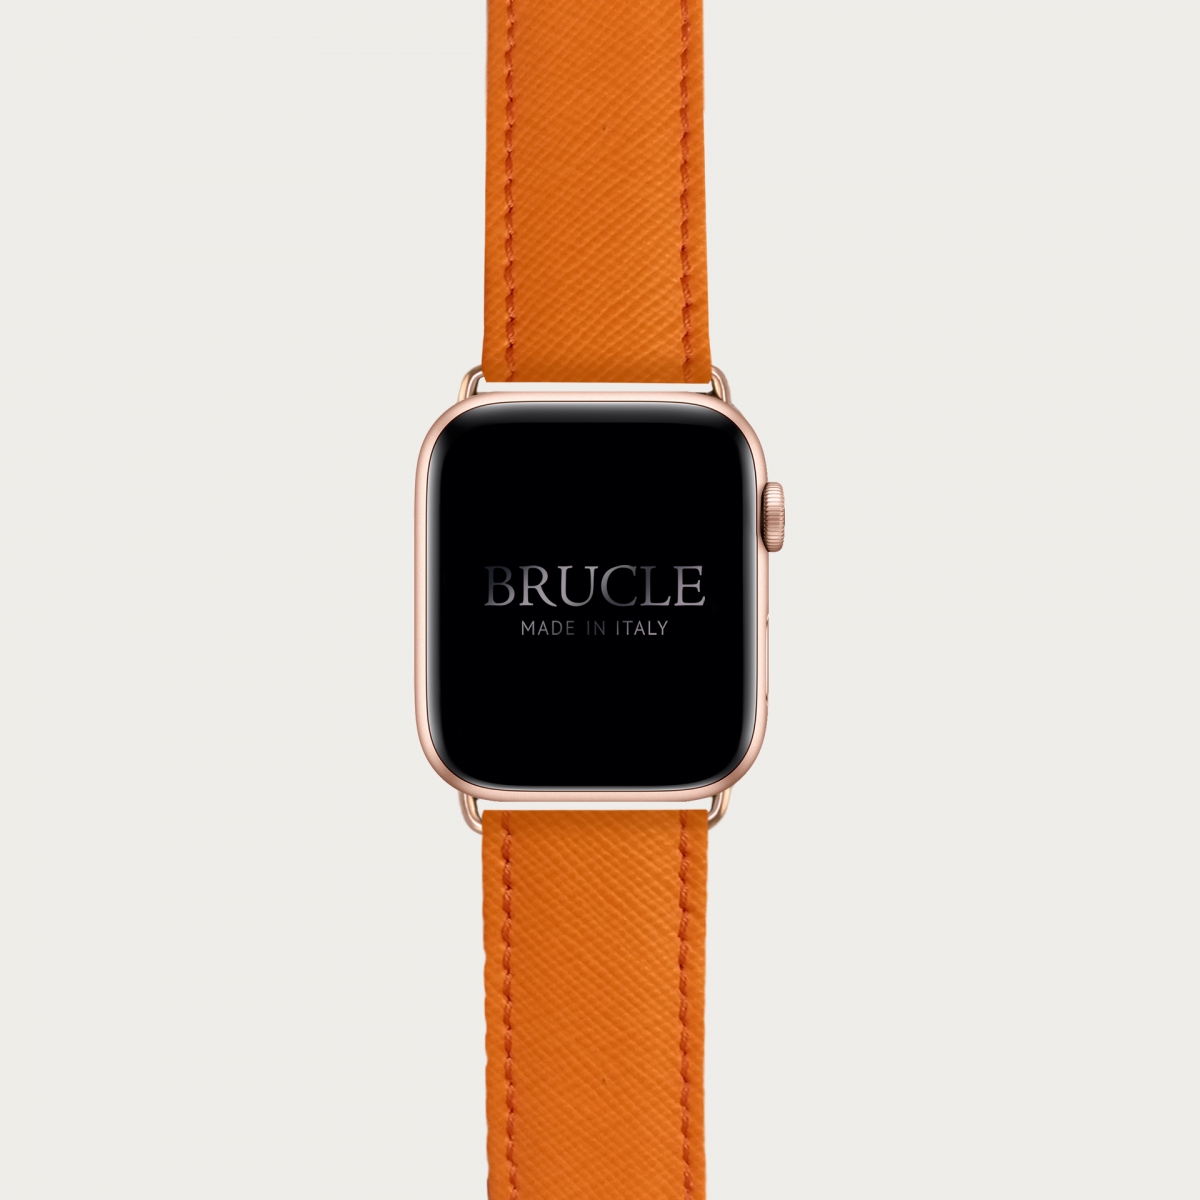 Leather Watch band compatible with Apple Watch / Samsung smartwatch, orange Saffiano print